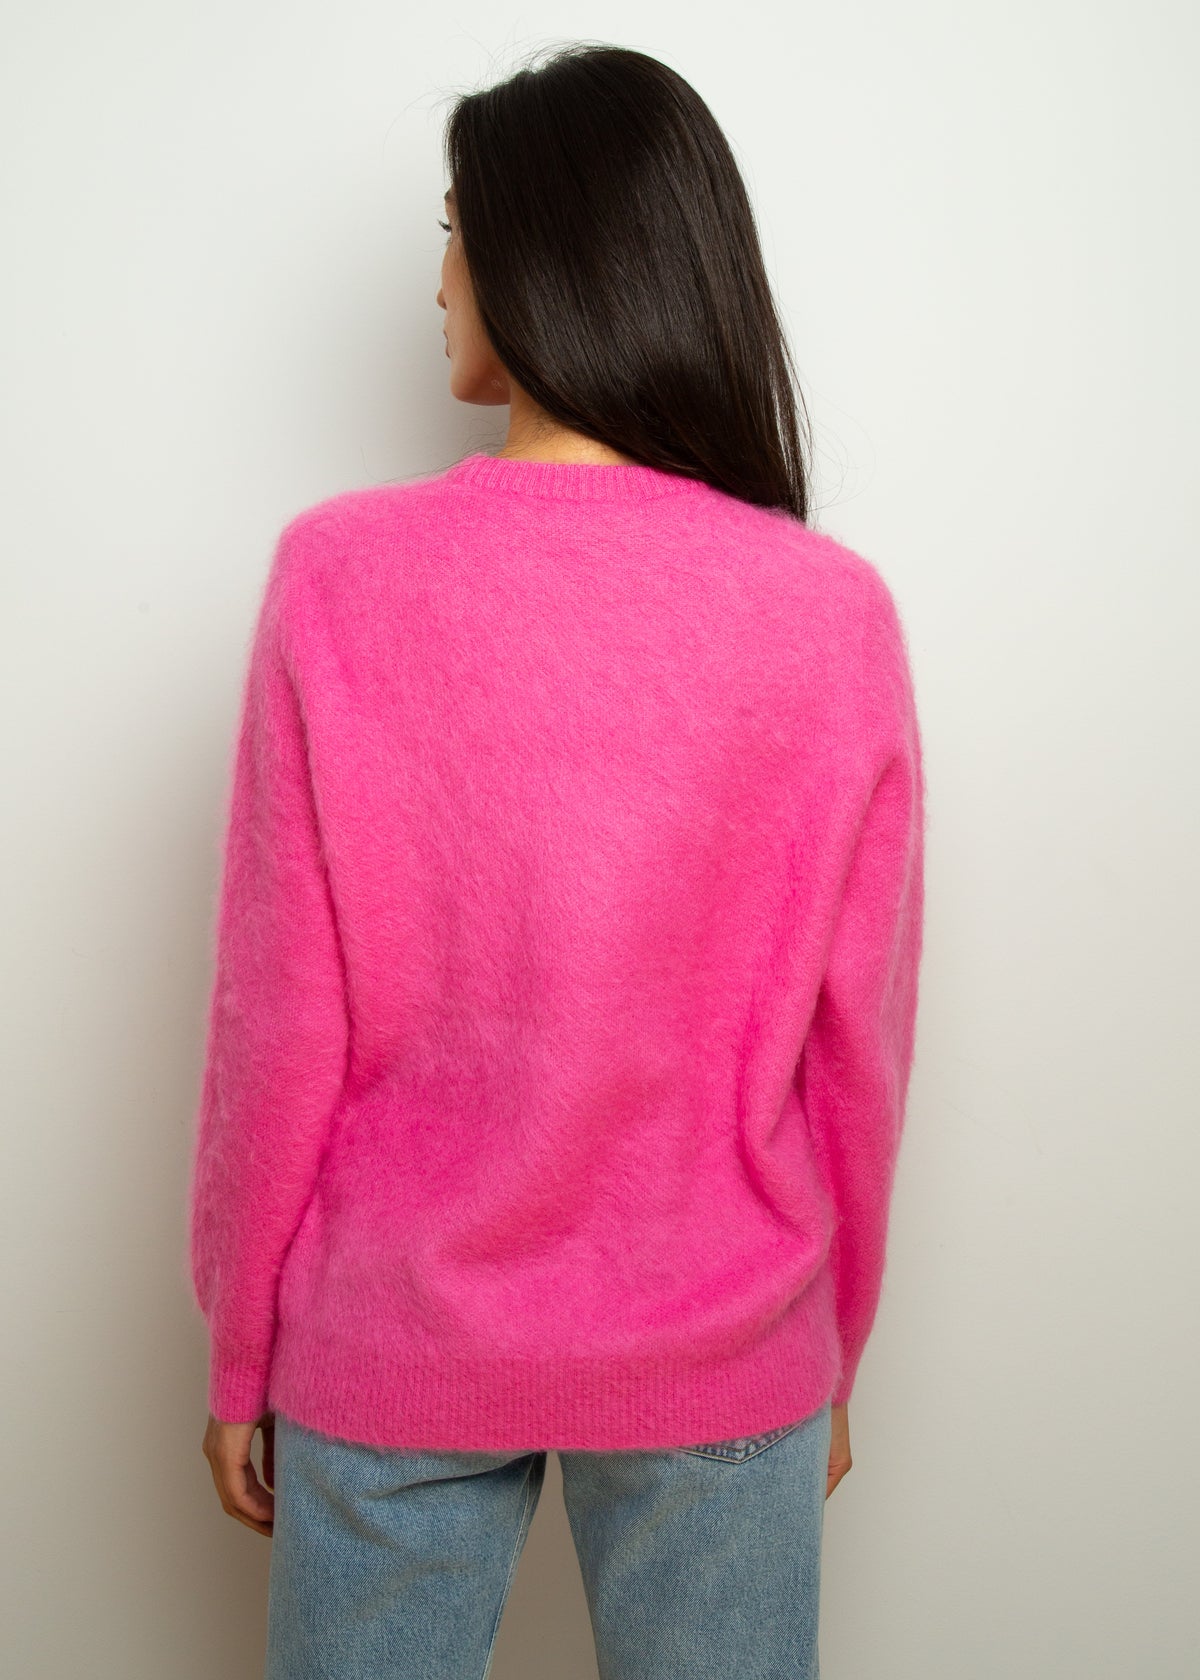 BF 1970 Mohair Jumper in Flamingo Pink